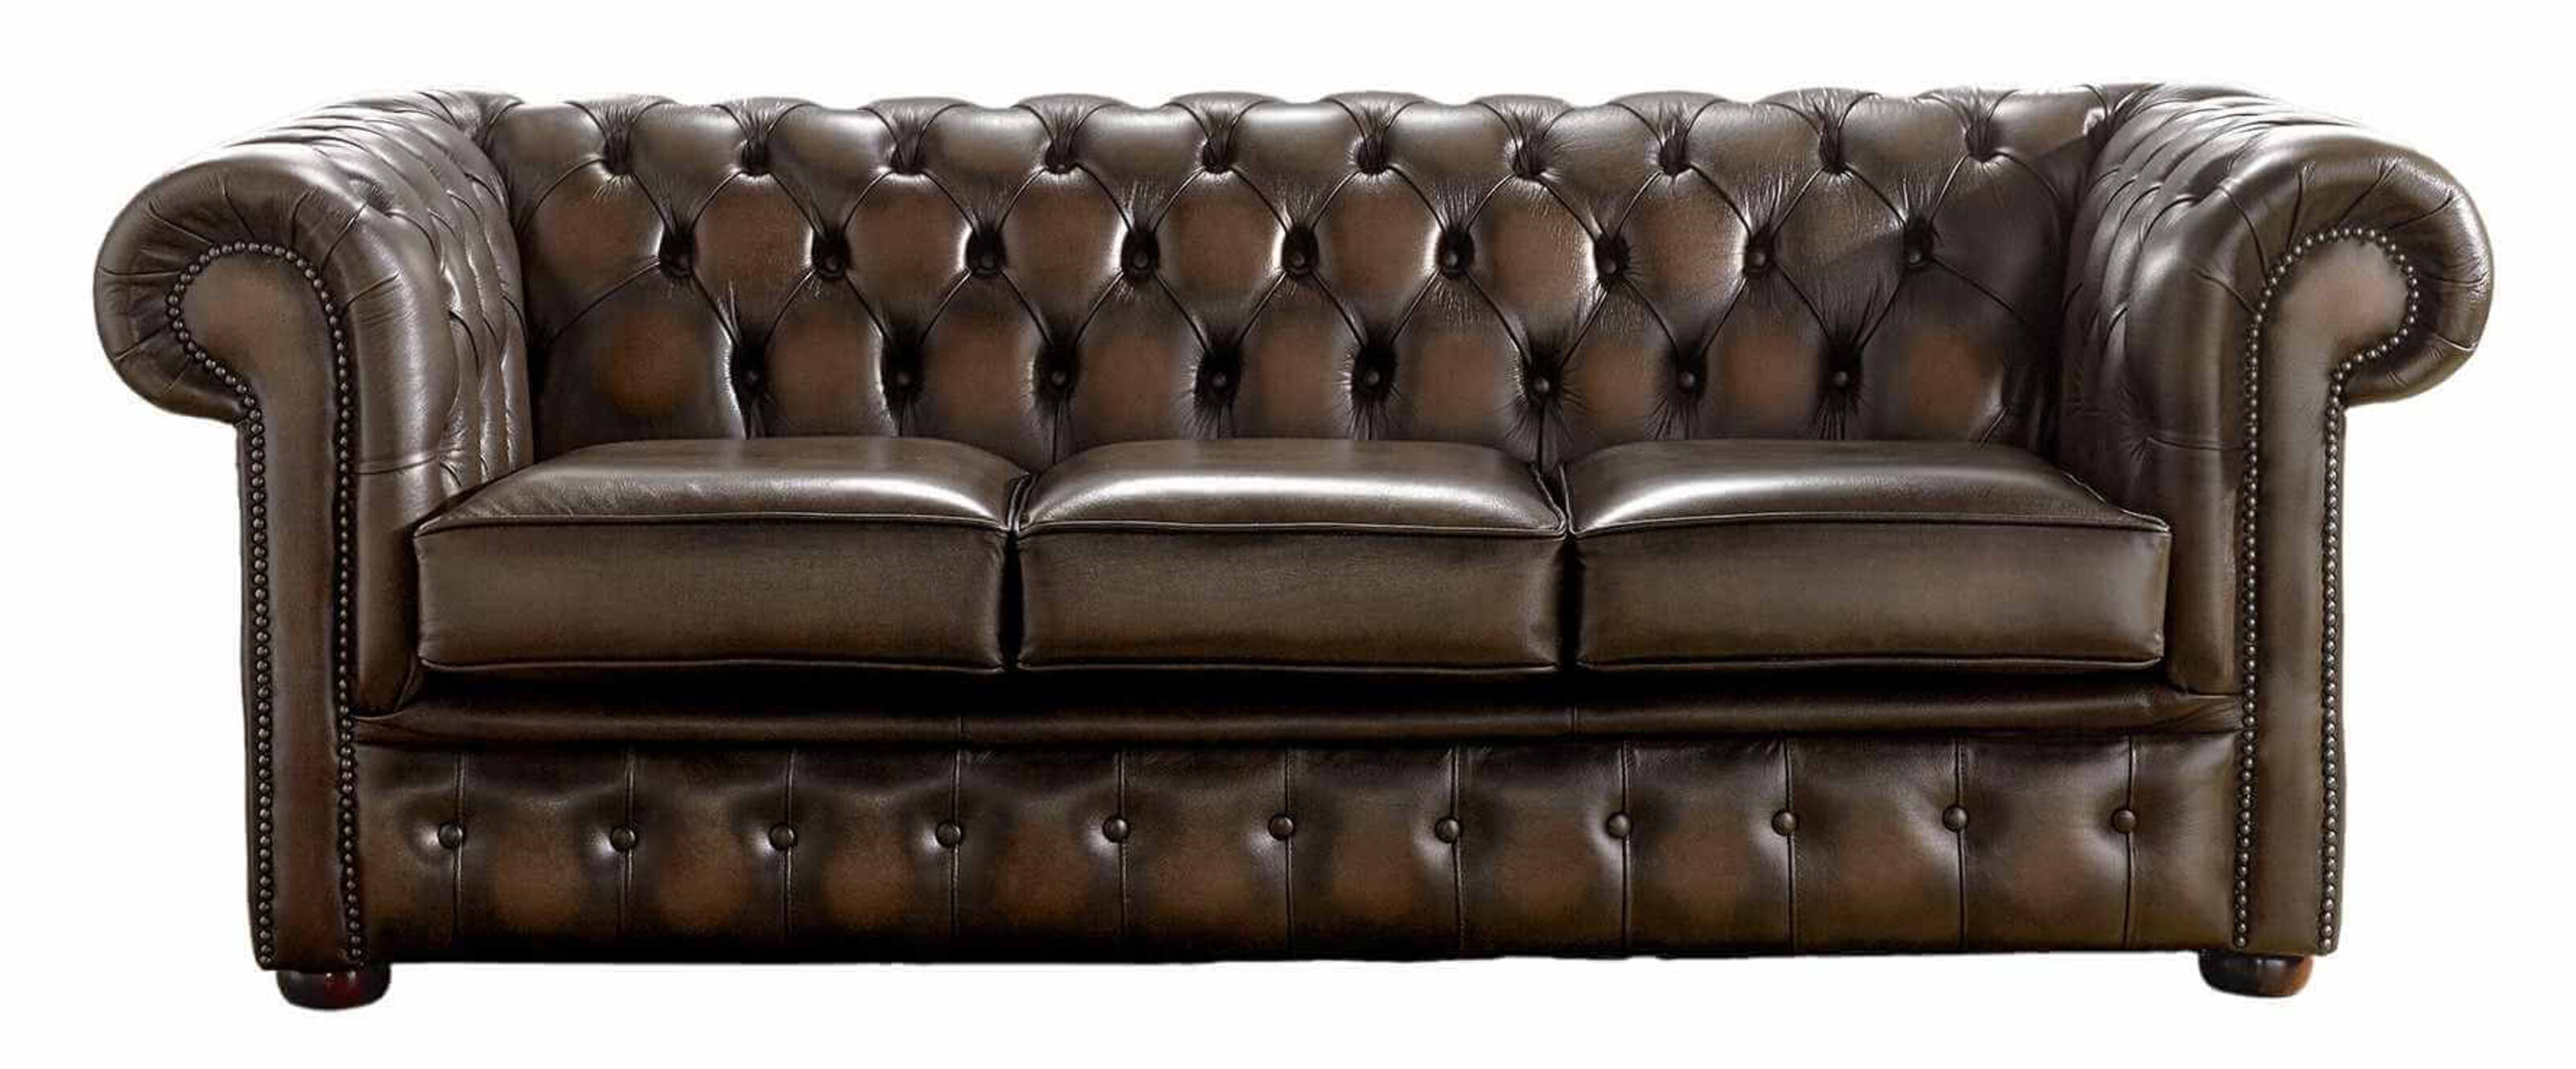 Assessing the Merits The Quality of Chesterfield Sofas  %Post Title